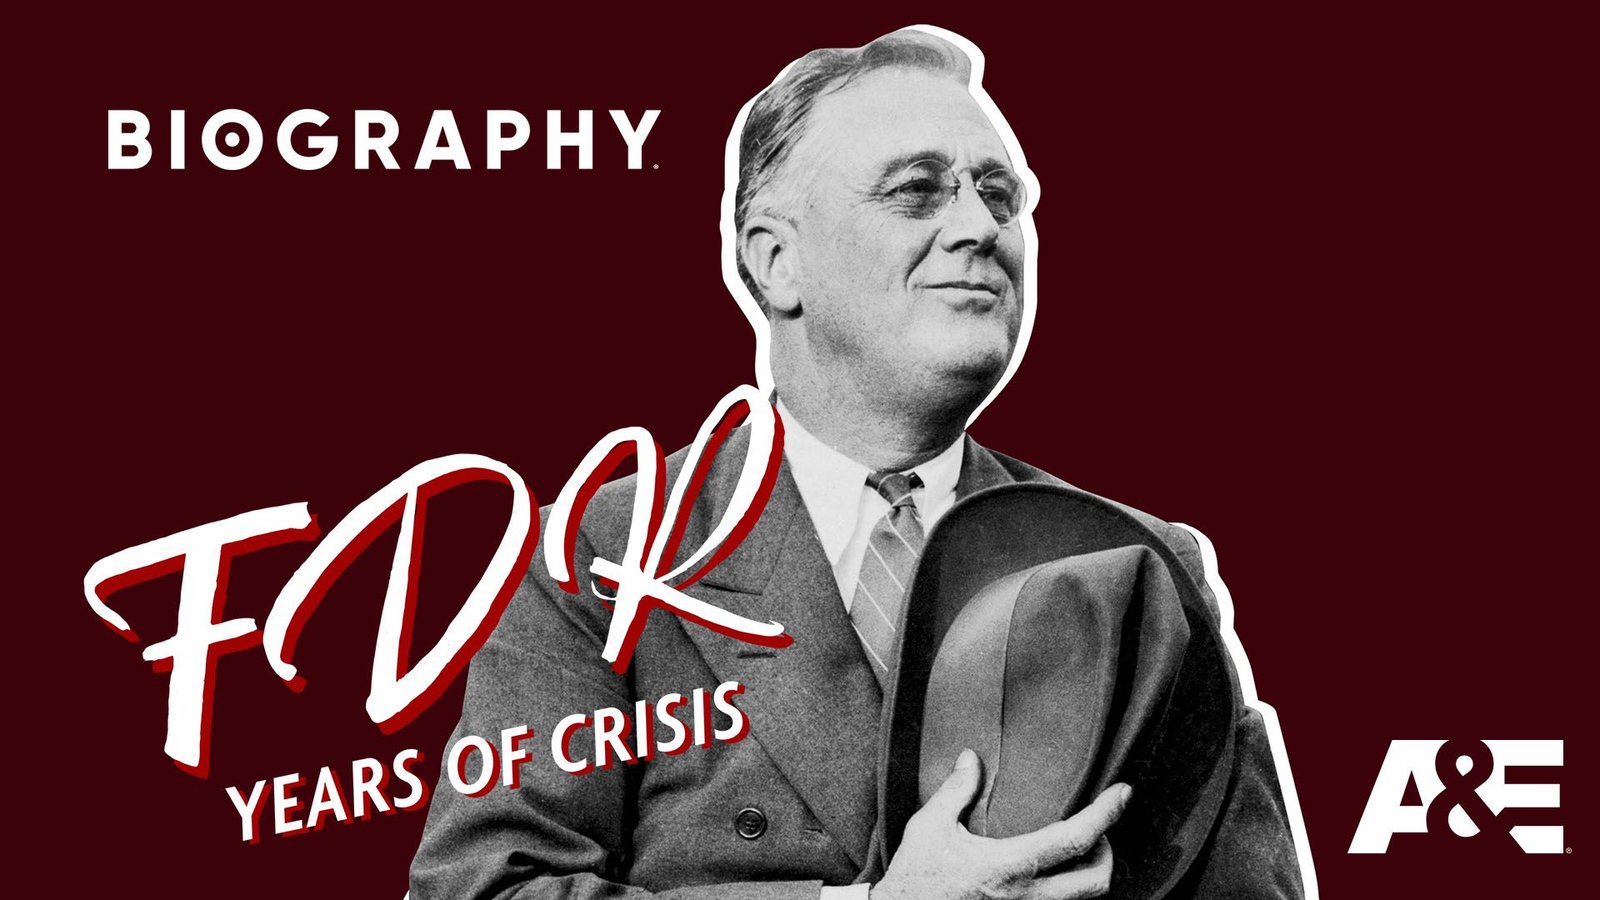 FDR: Years of Crisis